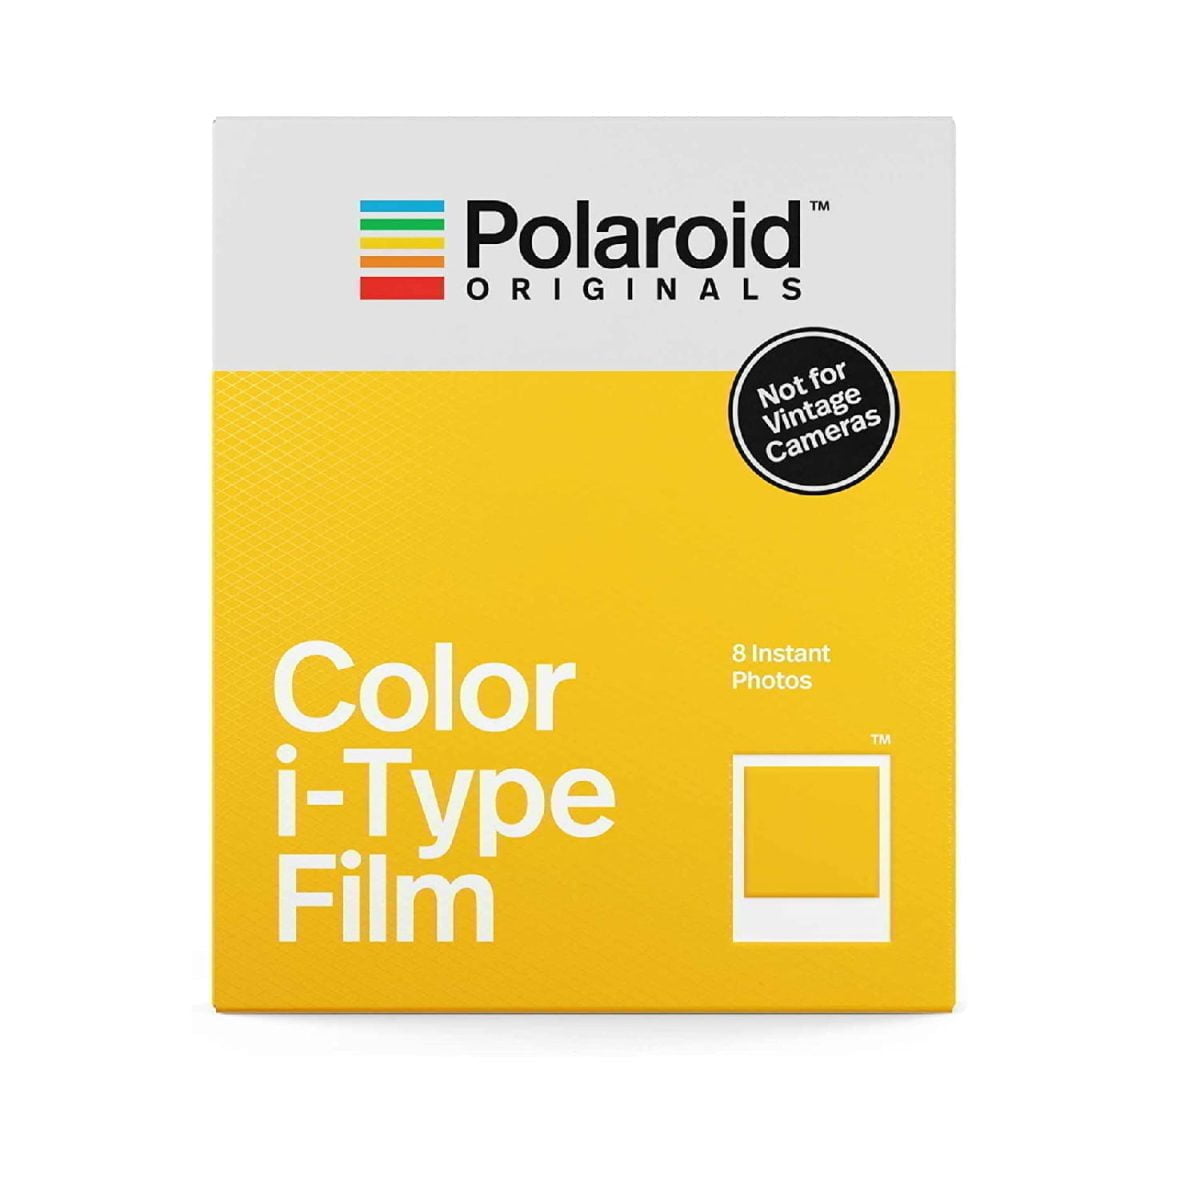 Lablab55 02 Polaroid &Lt;Ul Class=&Quot;A-Unordered-List A-Vertical A-Spacing-Mini&Quot;&Gt; &Lt;Li&Gt;&Lt;Span Class=&Quot;A-List-Item&Quot;&Gt;Instant Film With Classic White Frame / Format: Length 3.4&Quot; × Height 4.25&Quot; / Image Area : Length 3.1&Quot; × Height 3.1&Quot;&Lt;/Span&Gt;&Lt;/Li&Gt; &Lt;Li&Gt;&Lt;Span Class=&Quot;A-List-Item&Quot;&Gt;Asa 640 - The More Light In Your Shot, The Better Your Photo Will Turn Out. Instant Polaroid Film Loves Light, Especially Natural Light. Use The Flash For All Your Indoor Photos. For Best Results, We Also Recommend Using The Flash For Outdoor Shots, Unless It'S A Bright Sunny Day.&Lt;/Span&Gt;&Lt;/Li&Gt; &Lt;Li&Gt;&Lt;Span Class=&Quot;A-List-Item&Quot;&Gt;Photos Develop In 10-15 Mins / All Photos Appear Blank At First. They'Re Most Sensitive During This Time, So Don'T Bend Or Shake Them. Shield Them From The Light And Place Them Face Down As They Develop. Keep Color Photos Shielded From Light For About 6 Minutes.&Lt;/Span&Gt;&Lt;/Li&Gt; &Lt;Li&Gt;&Lt;Span Class=&Quot;A-List-Item&Quot;&Gt;Store Chilled, Shoot Warm - Temperature Affects How The Film Works. Keep It Stored Cold In The Fridge, But Never Freeze It. Ideally, You Should Let It Adjust To Room Temperature Before You Use It. That'S Around 55-80°F. When It'S Cold Out, Keep Your Photos Warm In A Pocket Close To Your Body While They Develop. Or If It'S A Hot Day, Make Sure They Stay Cool.&Lt;/Span&Gt;&Lt;/Li&Gt; &Lt;Li&Gt;&Lt;Span Class=&Quot;A-List-Item&Quot;&Gt;Does Not Work With Vintage Polaroid Cameras - Only For Onestep 2 Camera&Lt;/Span&Gt;&Lt;/Li&Gt; &Lt;Li&Gt;&Lt;Span Class=&Quot;A-List-Item&Quot;&Gt;8 Instant Photos- Polaroid Pictures Are Unique, No Two Pictures Are The Same, So Think Before You Shoot.&Lt;/Span&Gt;&Lt;/Li&Gt; &Lt;/Ul&Gt; Polaroid Originals Instant Film Color Film For I-Type - White Frame